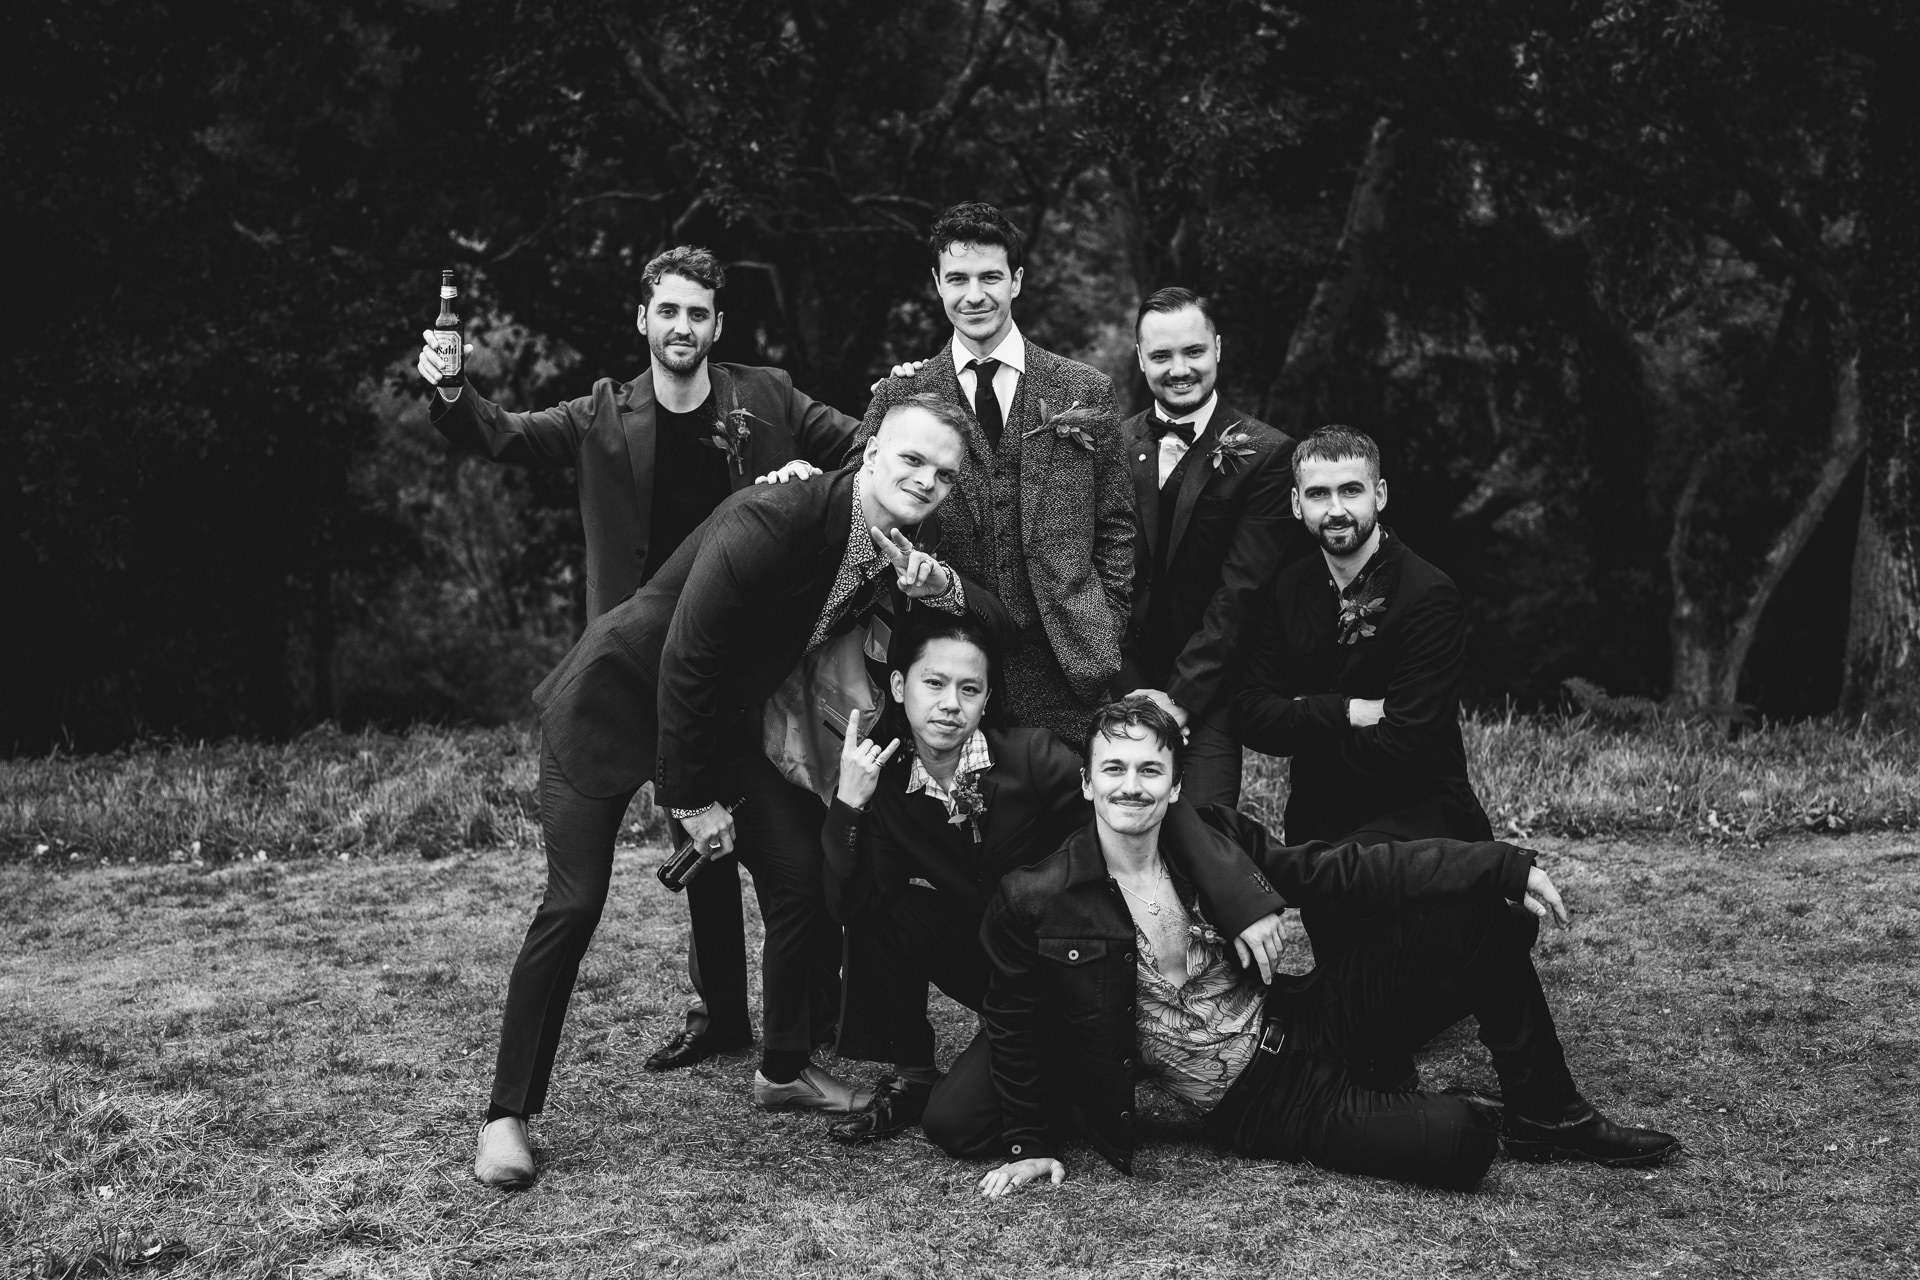 A relaxed group photo of groom and groomsmen at an outdoor wedding in Devon